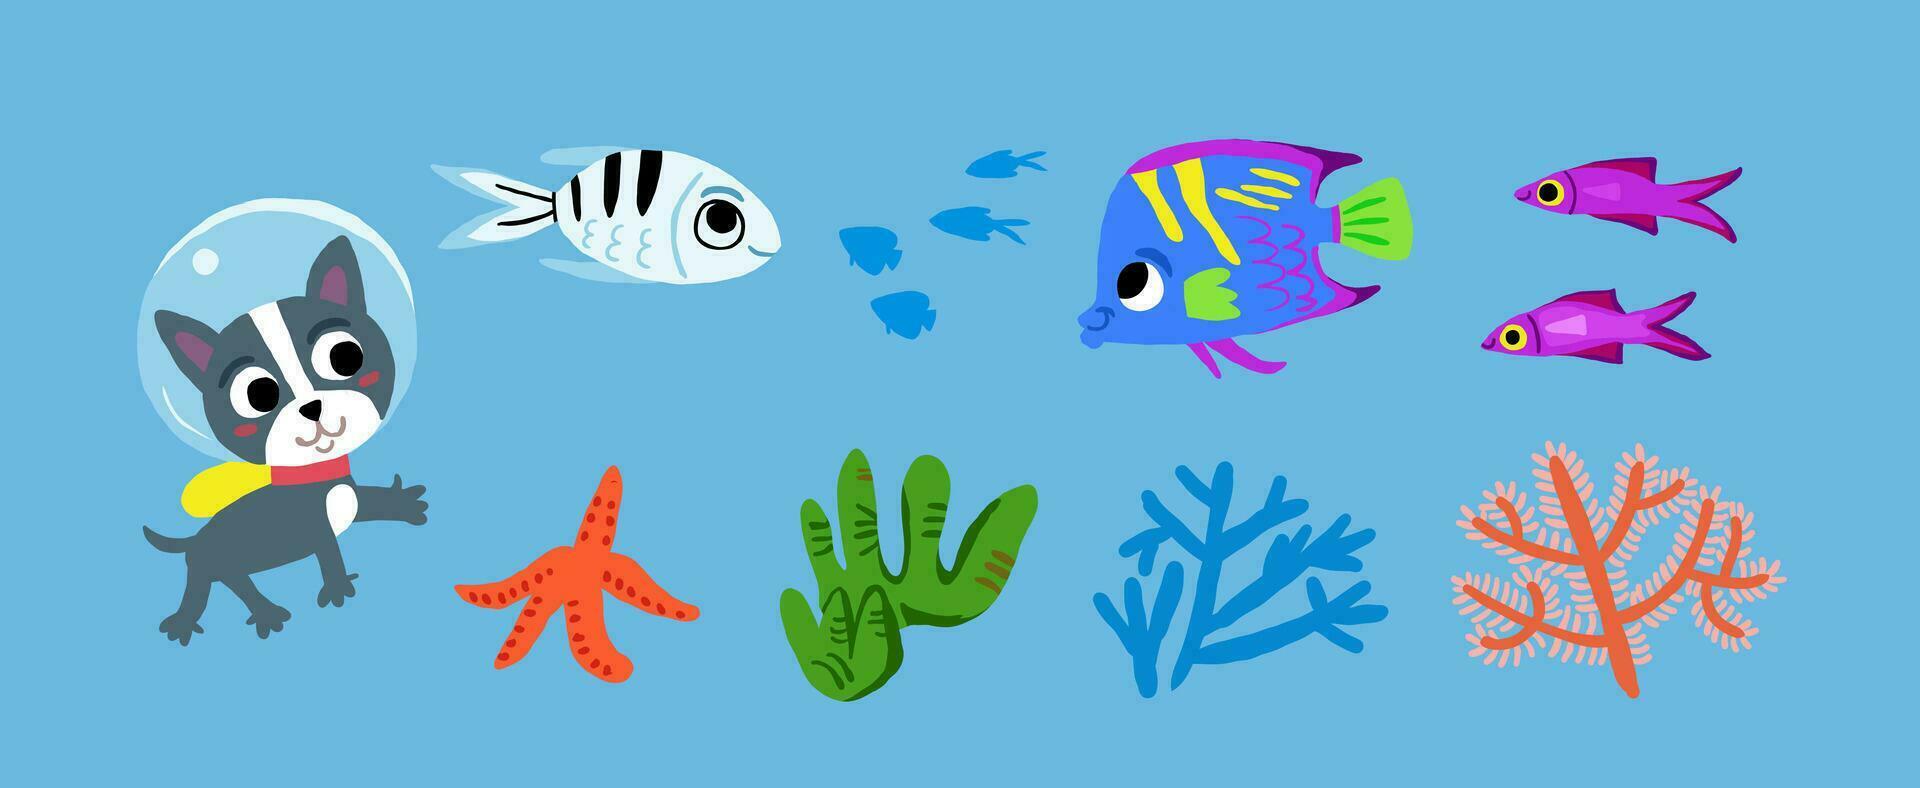 Vector set of underwater characters from children's picture book. Dog diving underwater, cute fish, corals, seaweed. Children illustration of underwater world